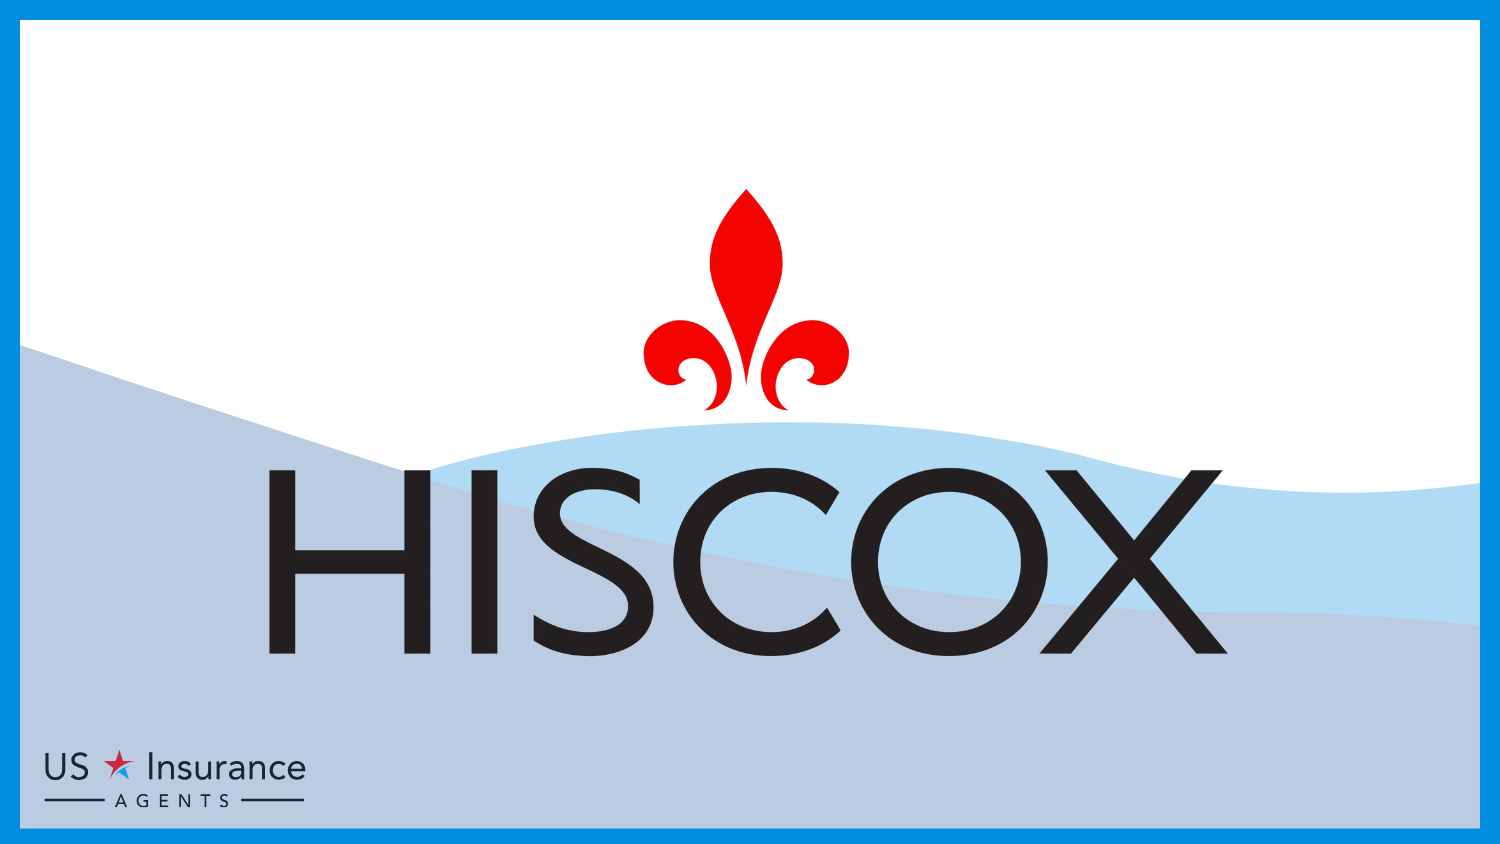 Hiscox: Best Business Insurance for Pet Groomers